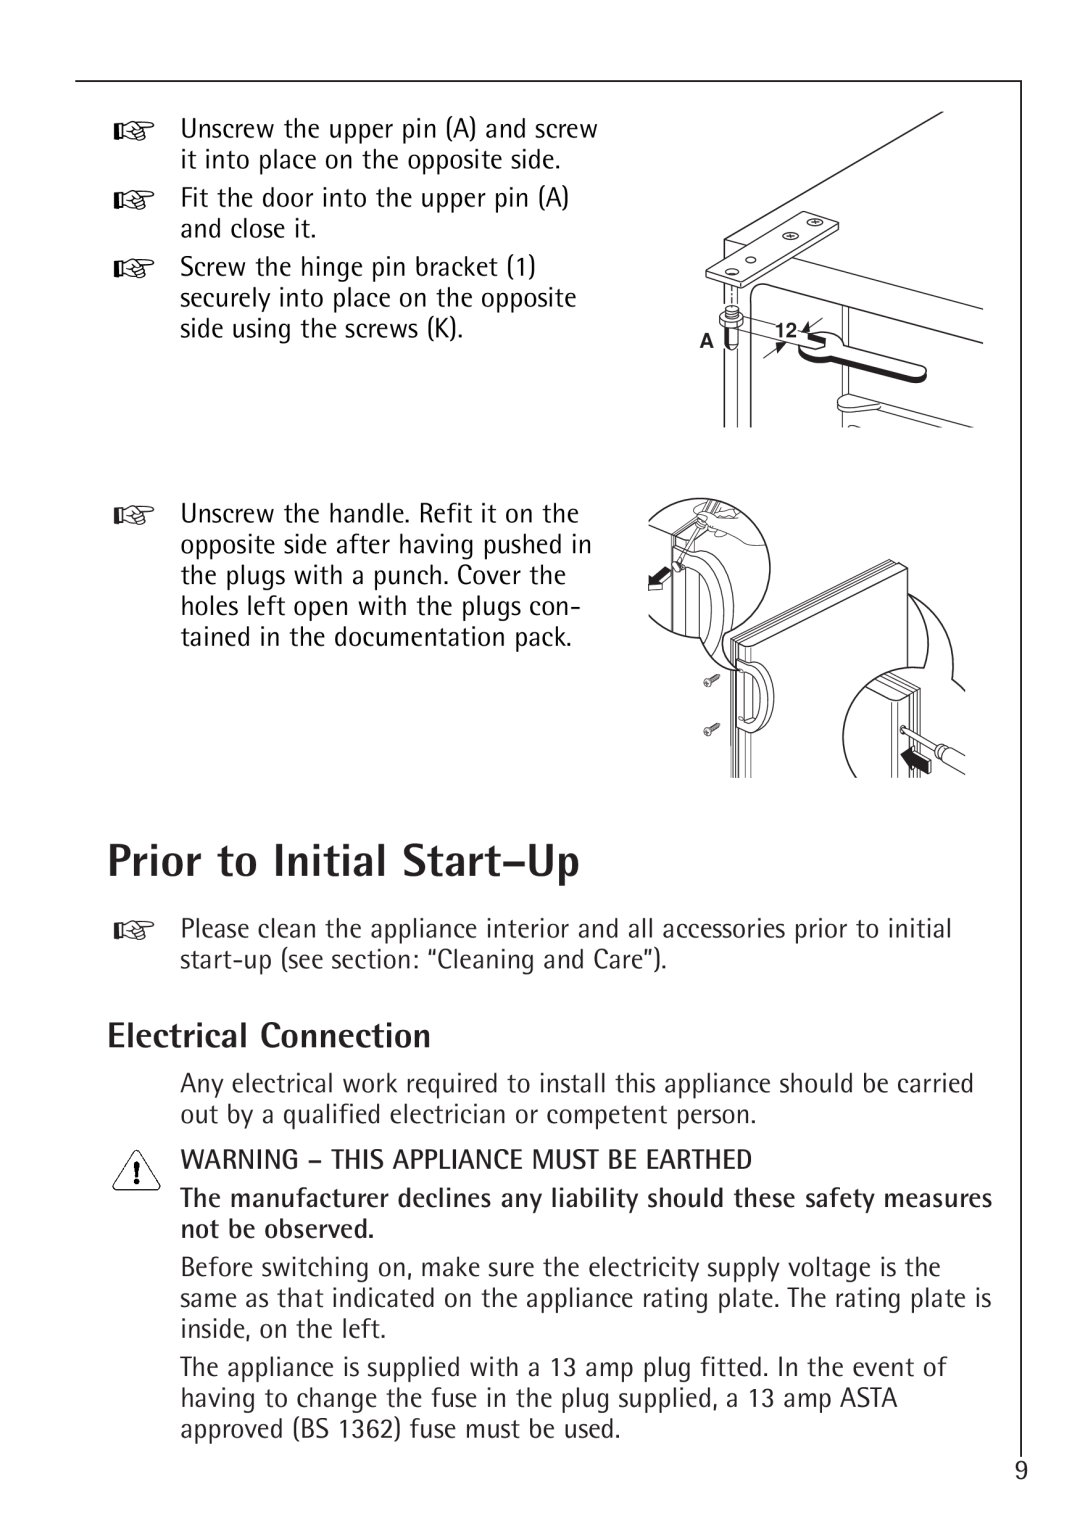 Electrolux 1683-7 TK, 1688-7 TK Prior to Initial Start-Up, Electrical Connection, Warning - This Appliance Must Be Earthed 